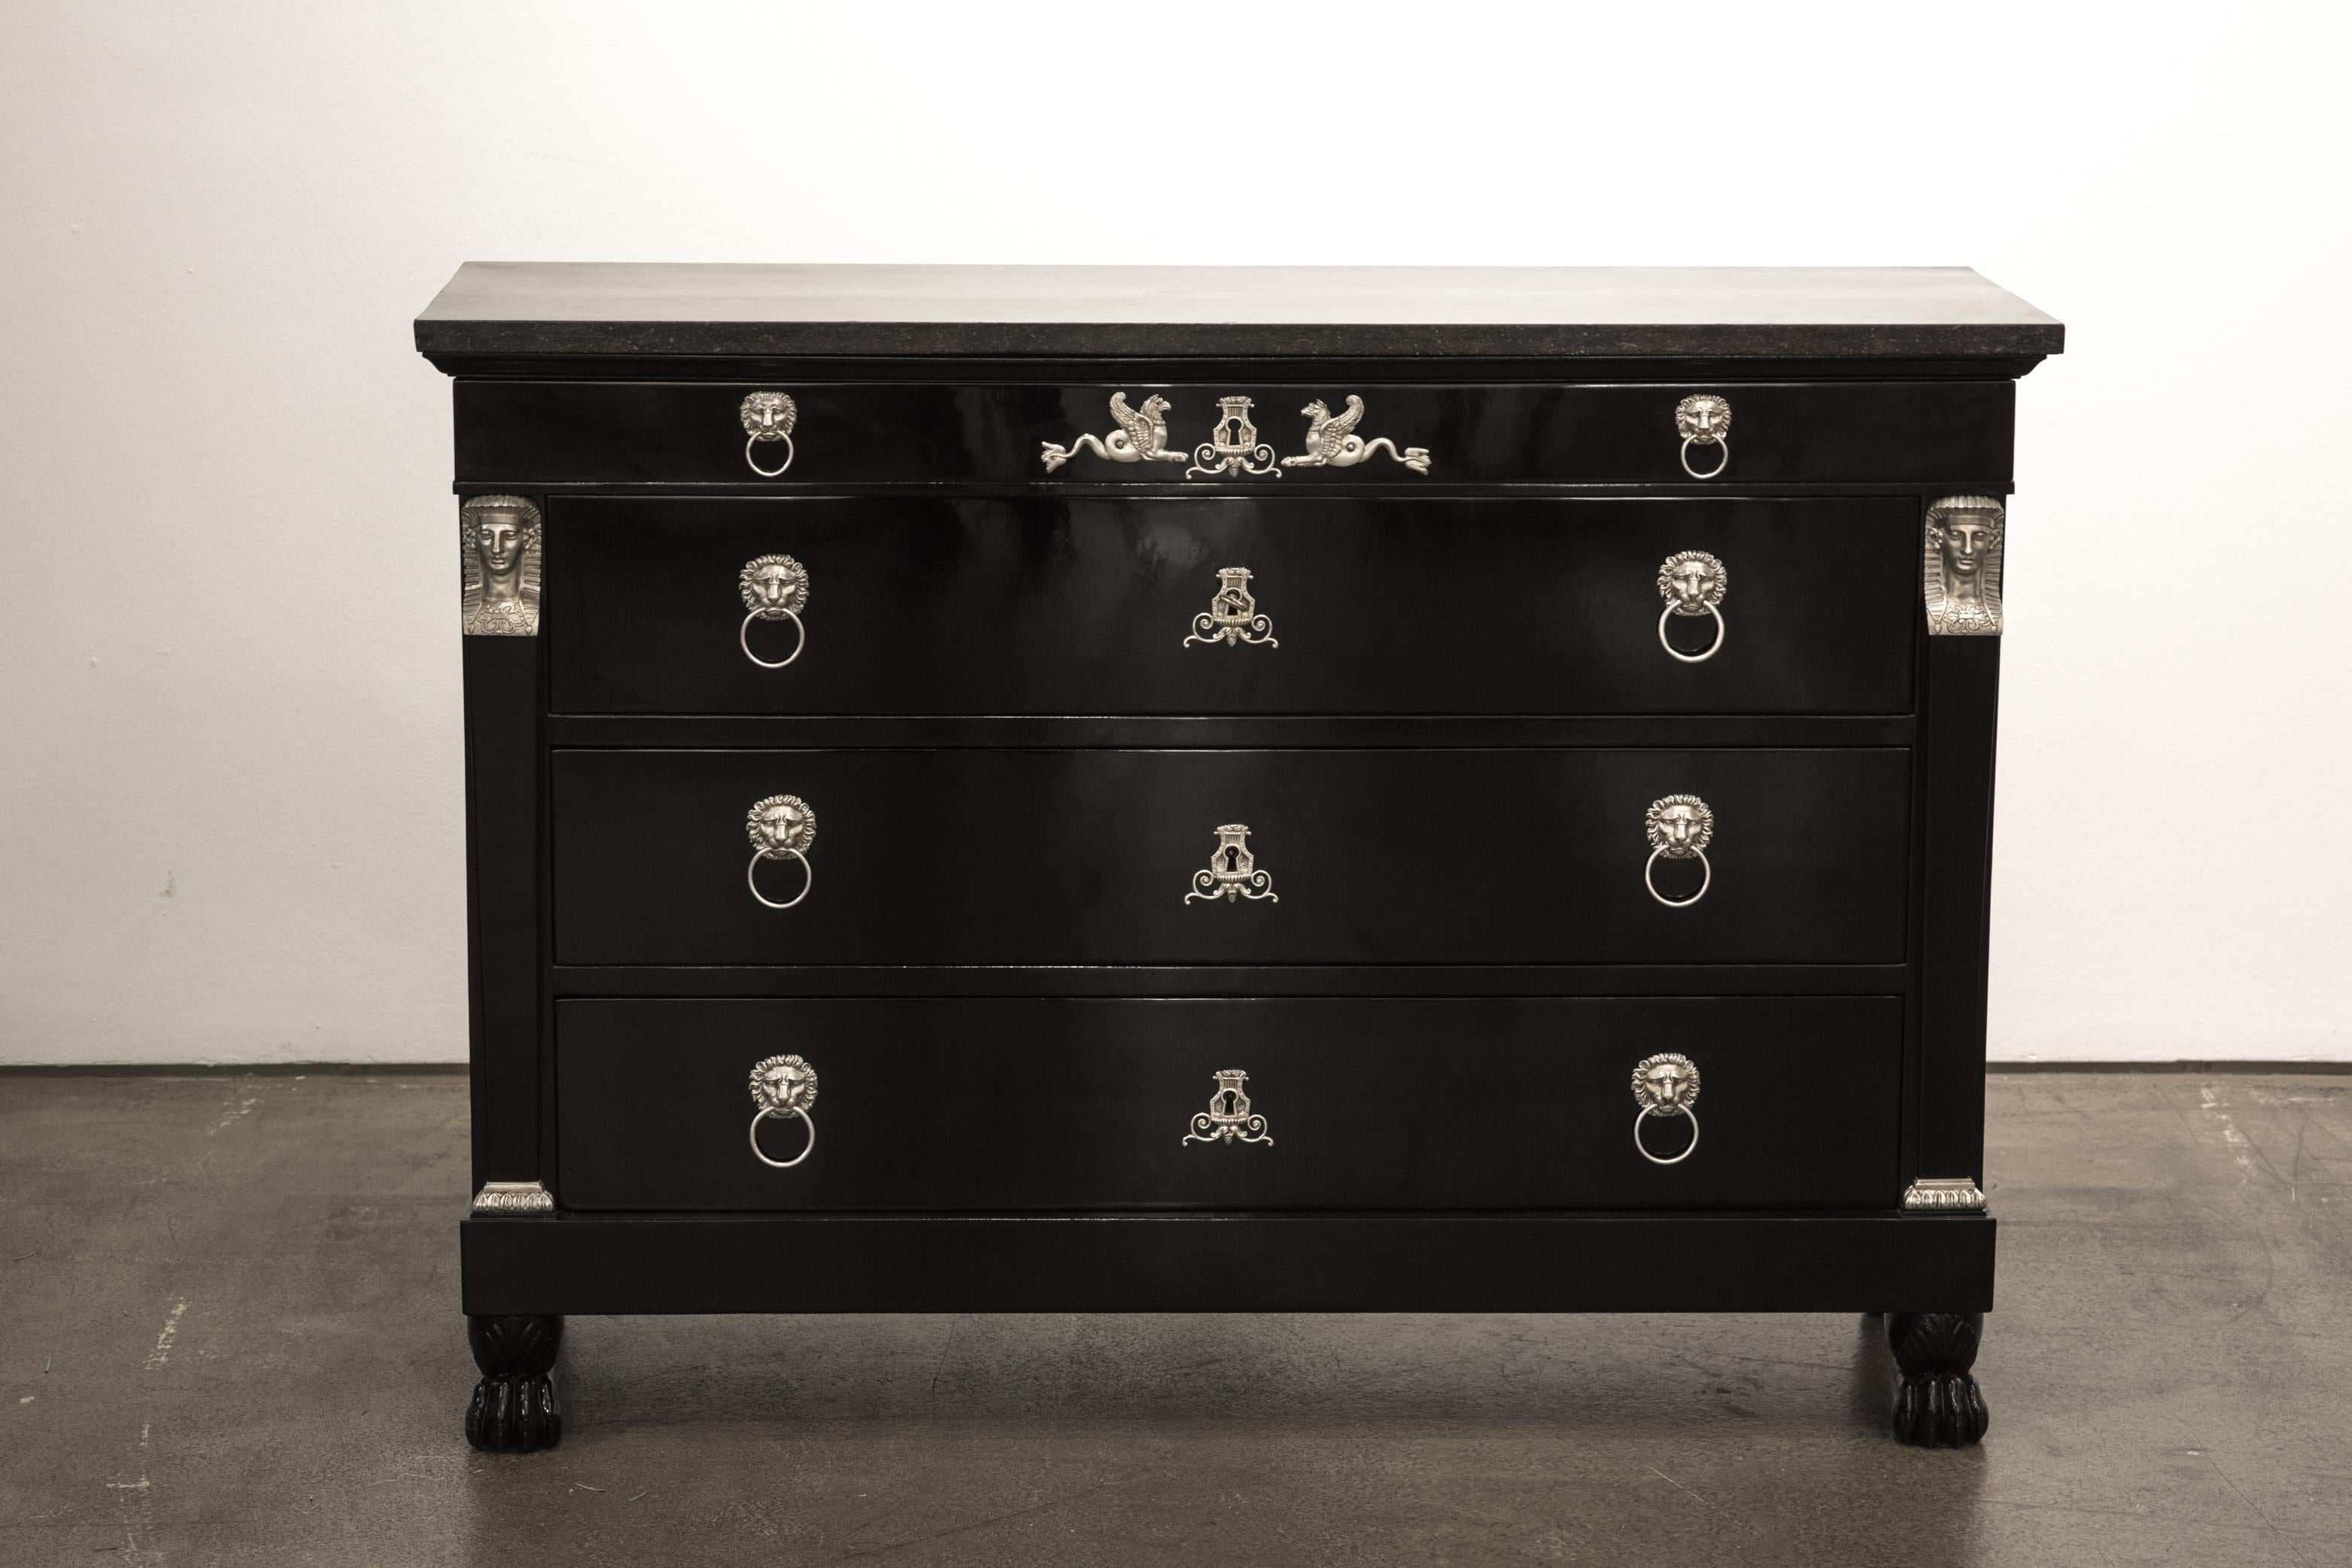 An original antique Empire chest of drawers from the early 19th century from France.
The corpus of the commode is made from oak and is ebonized and polished.

The commode has four drawers and an original marble top. On both sides it is flanked by